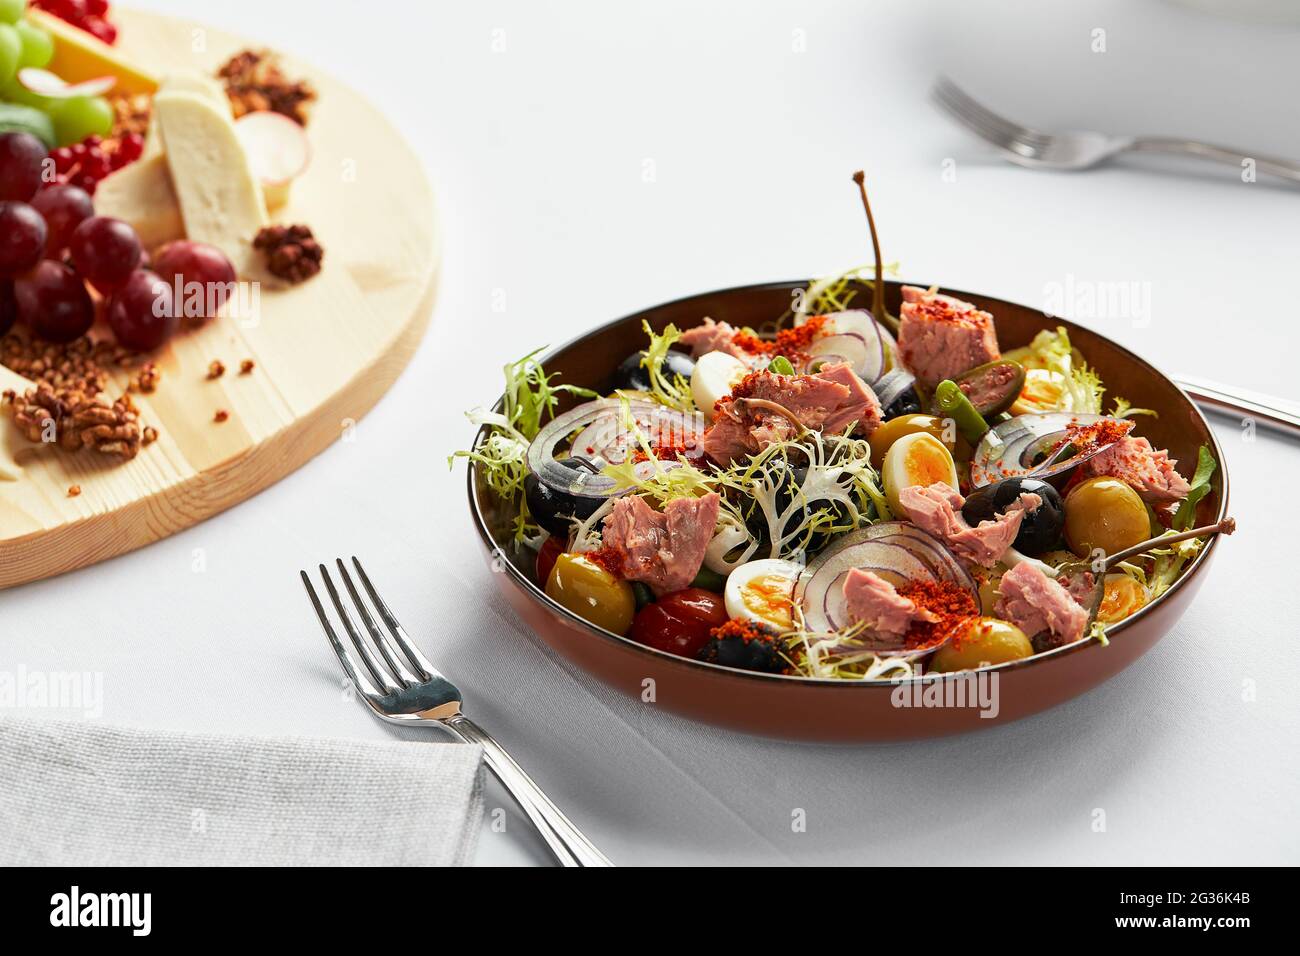 Fish salad on a light background, classic nicoise with large pieces of tuna fillet, eggs, olives and onions. Stock Photo